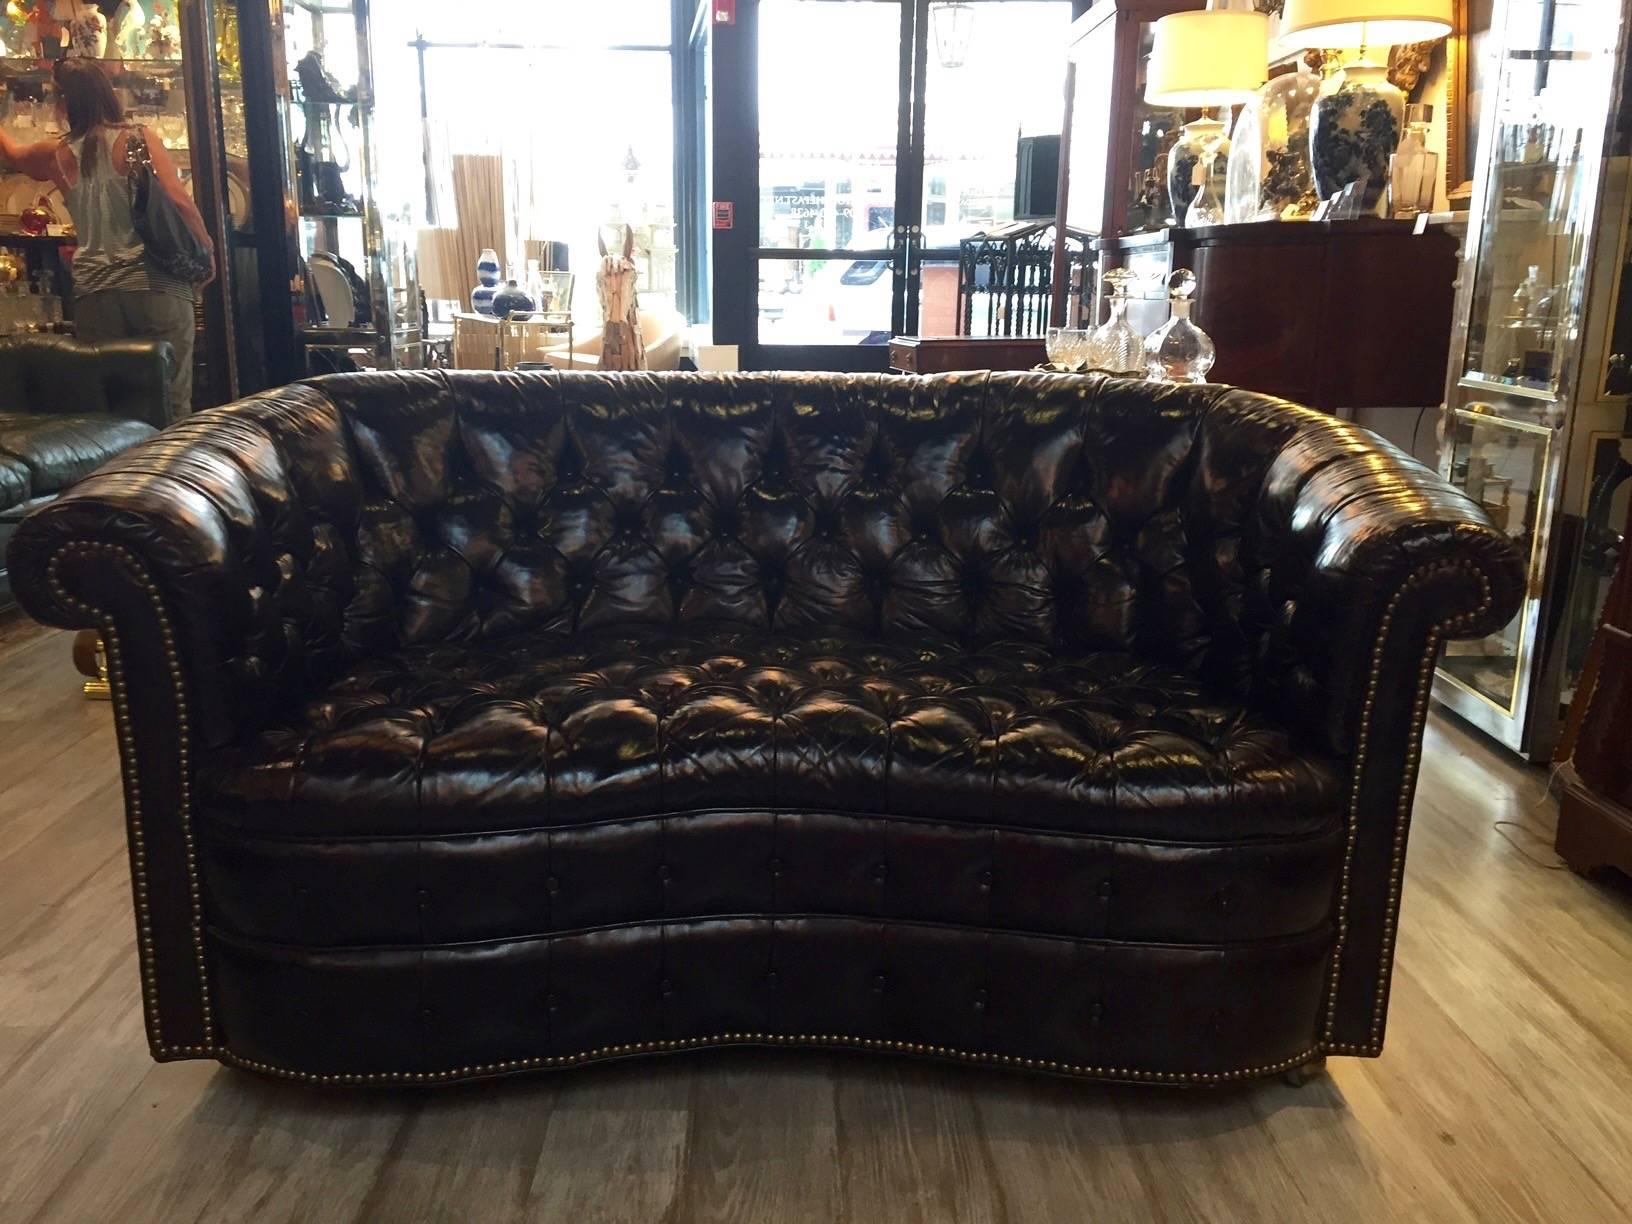 Very rare find in rich dark brown leather, this wonderful curved tufted Chesterfield loveseat oozes character. Brass hobnails define the sensual shape of the base and arms and it's easily moved on brass casters.